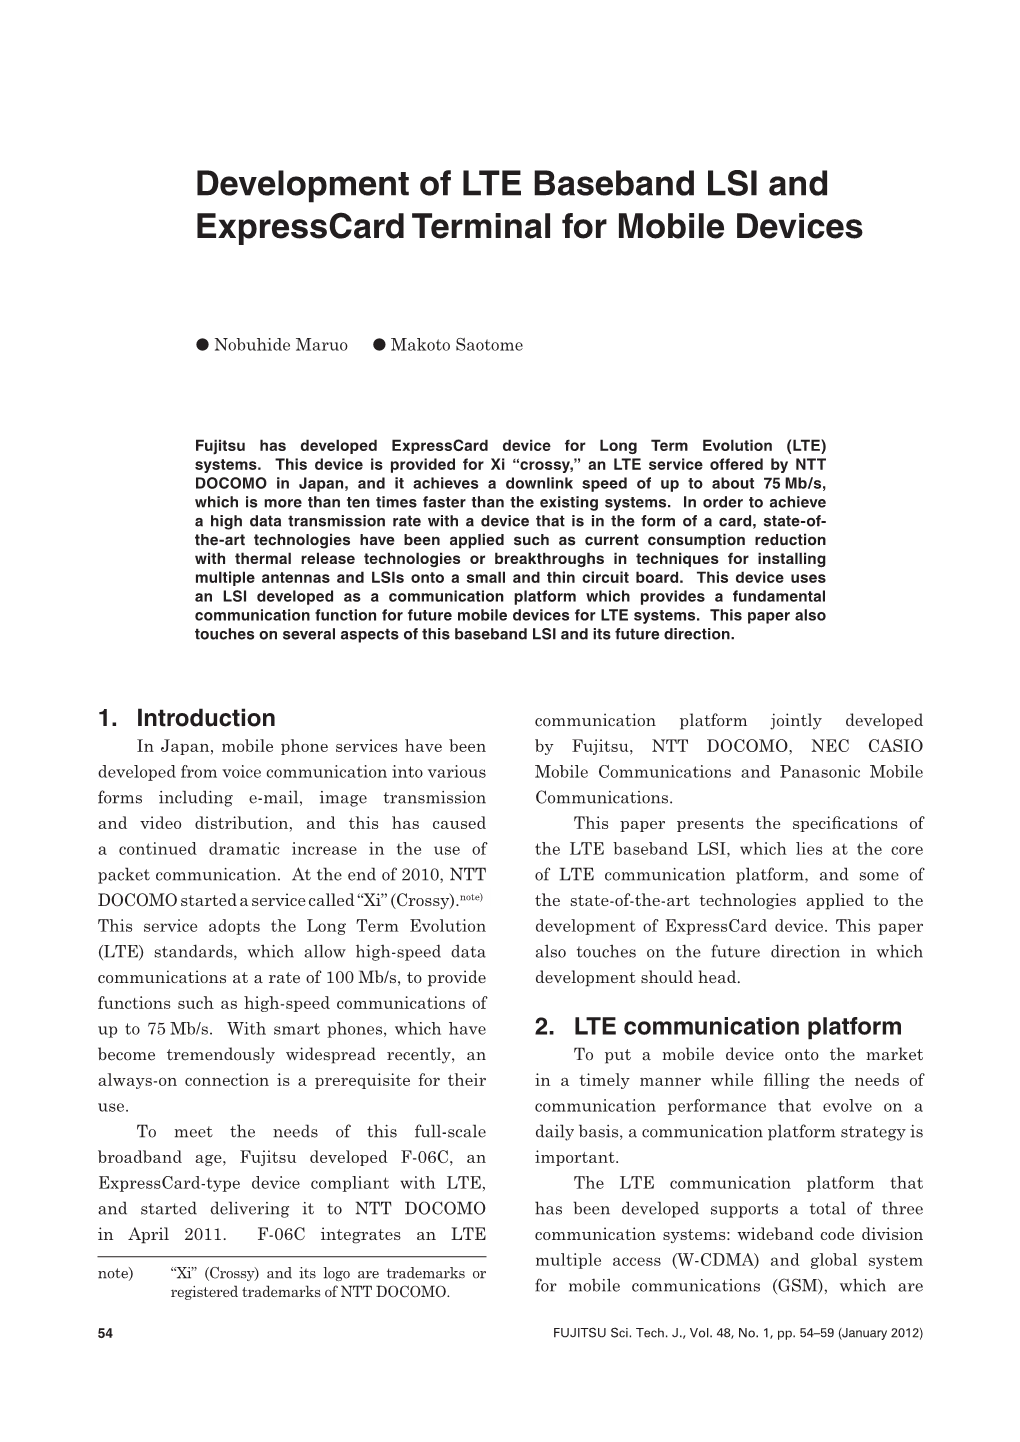 Development of LTE Baseband LSI and Expresscard Terminal for Mobile Devices